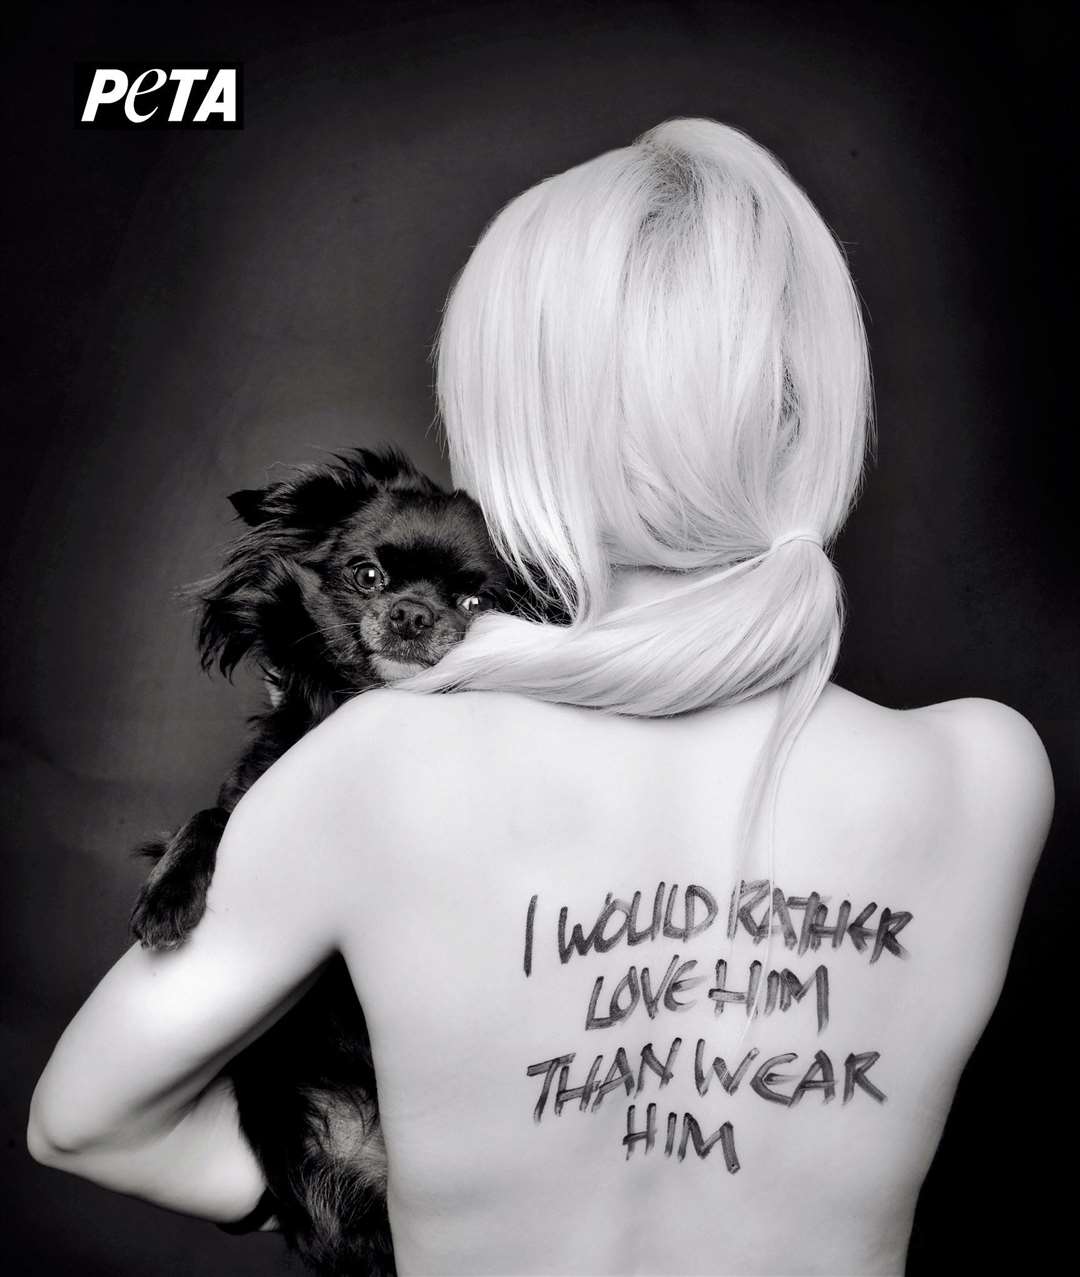 Natalie Oag featured in a publicity image for PETA against the wearing of fur and is pictured with her faithful furry companion Louis the Chihuahua.